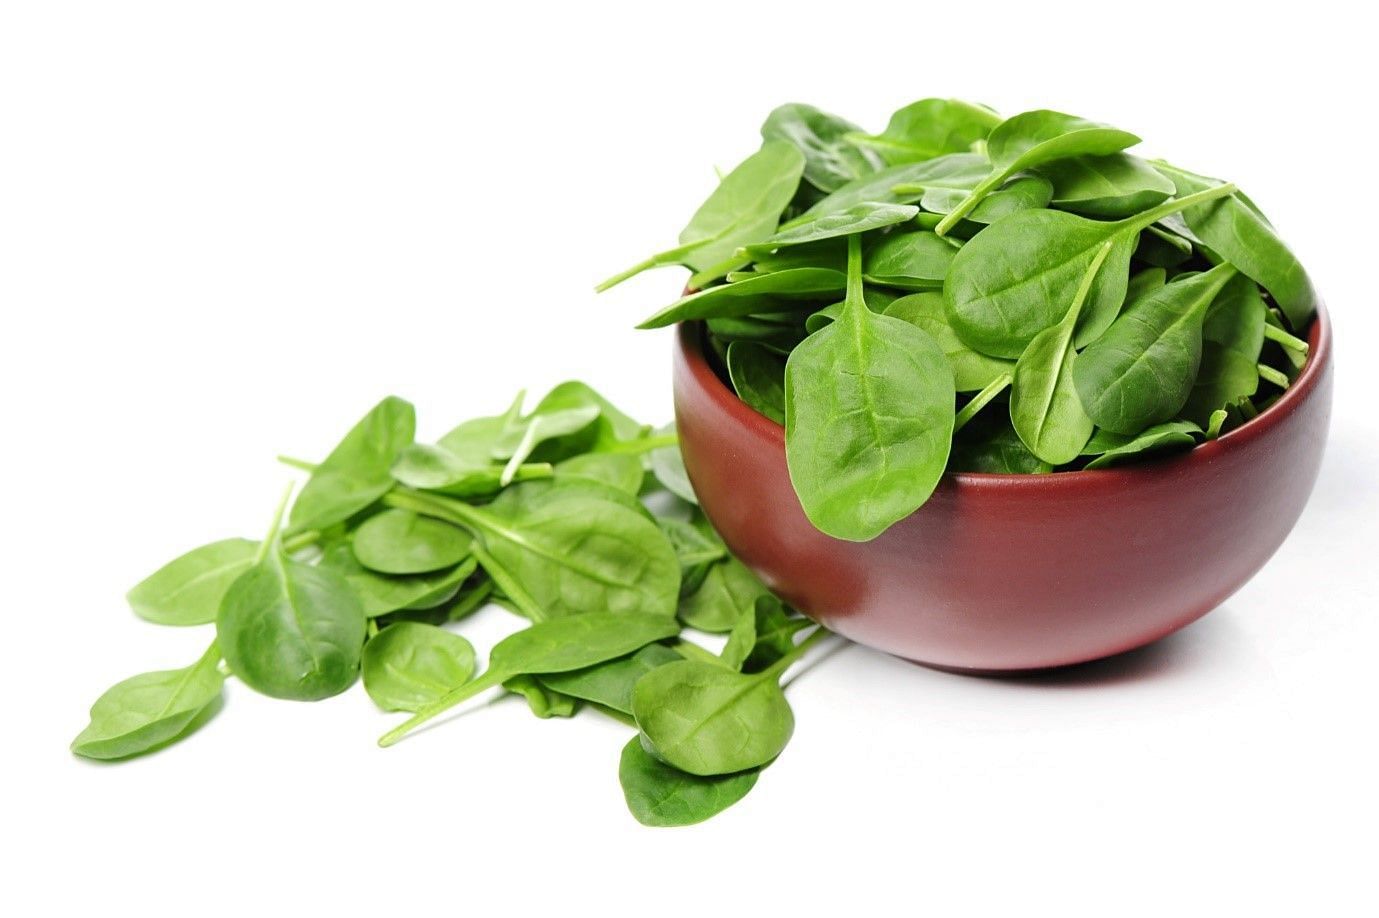 Spinach is one of the most essential part of a balanced diet due to its nutrient density (Image by Racool_studio on Freepik)